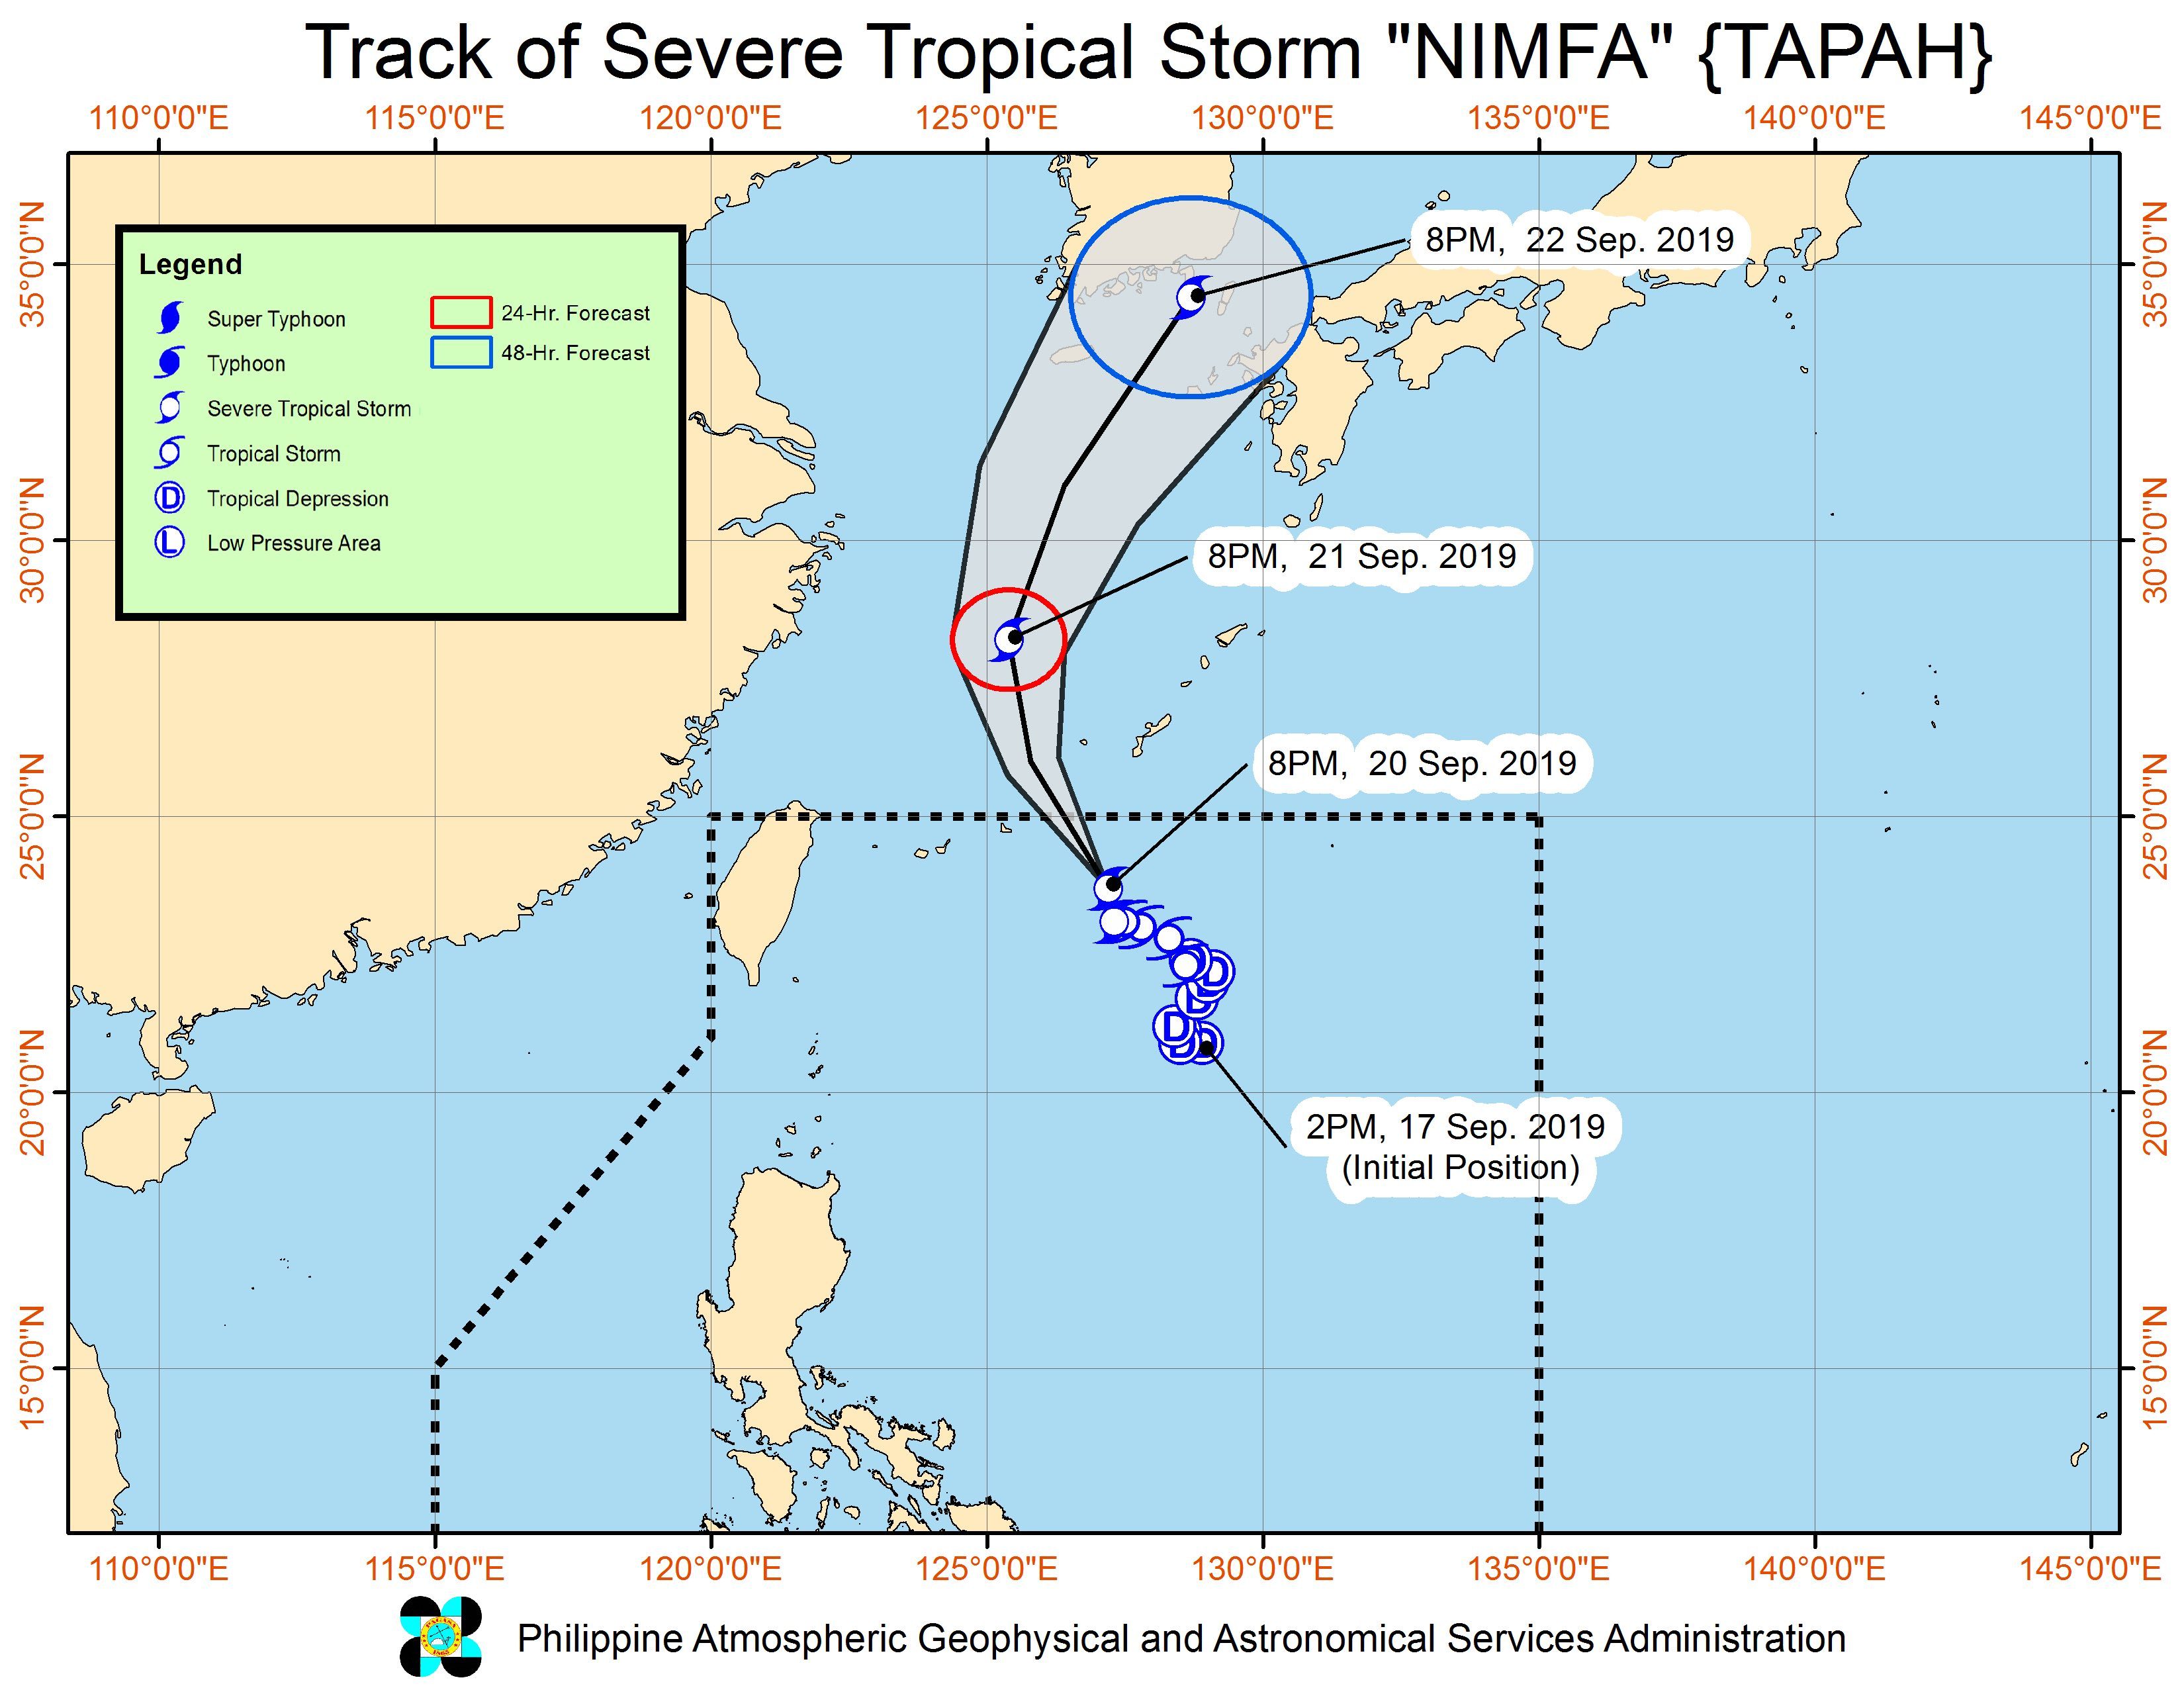 Forecast track of Severe Tropical Storm Nimfa (Tapah) as of September 20, 2019, 11 pm. Image from PAGASA 